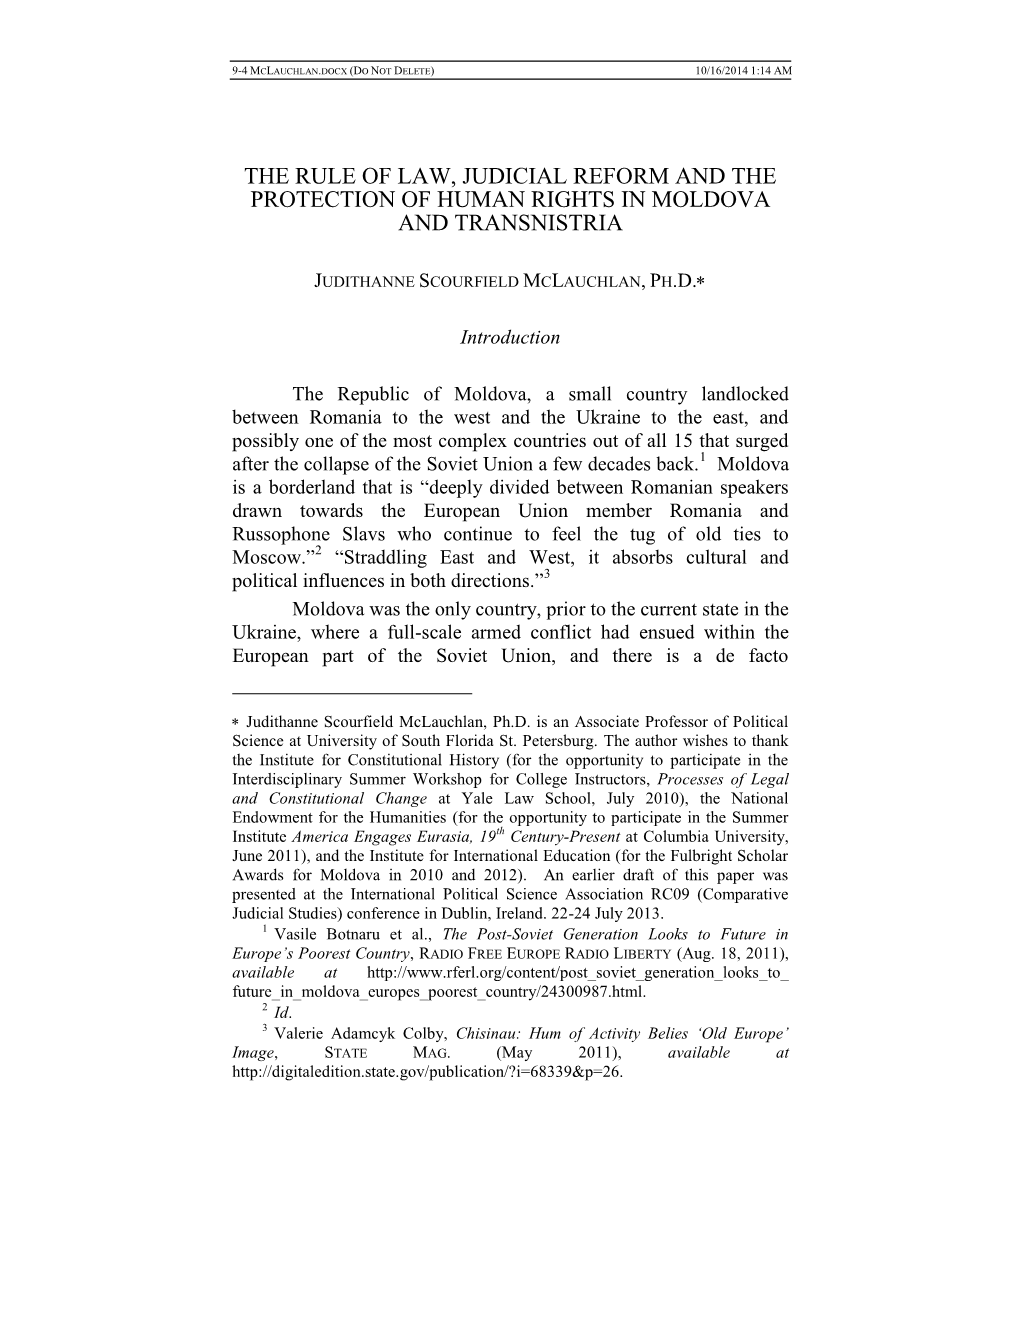 The Rule of Law, Judicial Reform and the Protection of Human Rights in Moldova and Transnistria